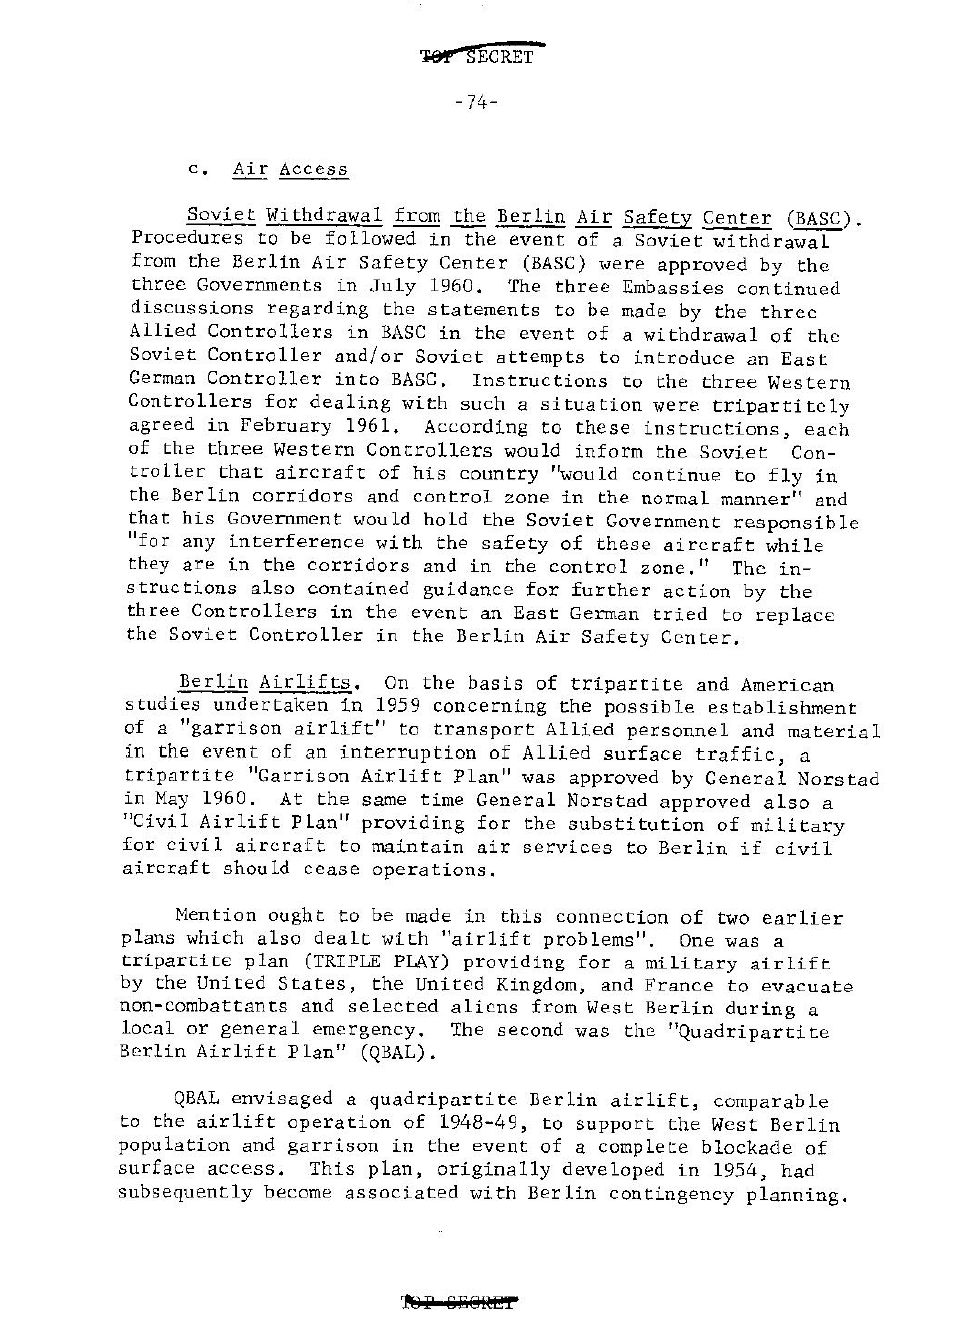 Berlin-Crisis-State-Department-Historical-Documents-Page-2